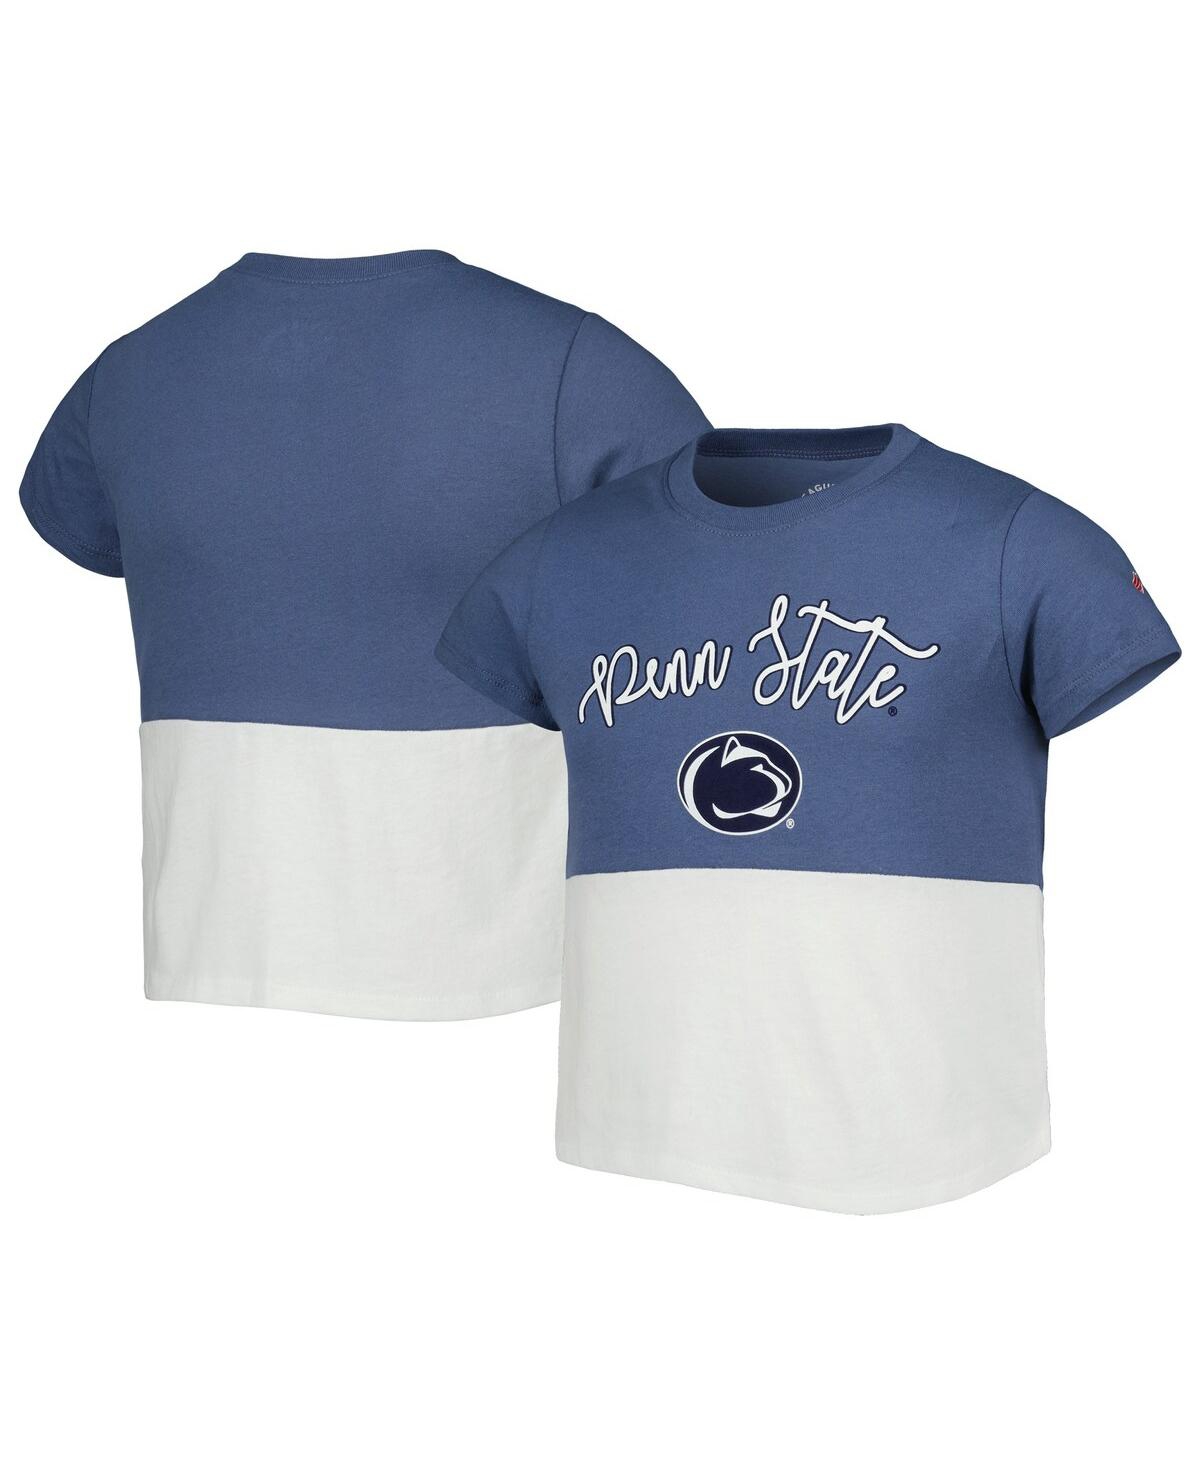 LEAGUE COLLEGIATE WEAR BIG GIRLS LEAGUE COLLEGIATE WEAR NAVY, WHITE PENN STATE NITTANY LIONS COLORBLOCKED T-SHIRT